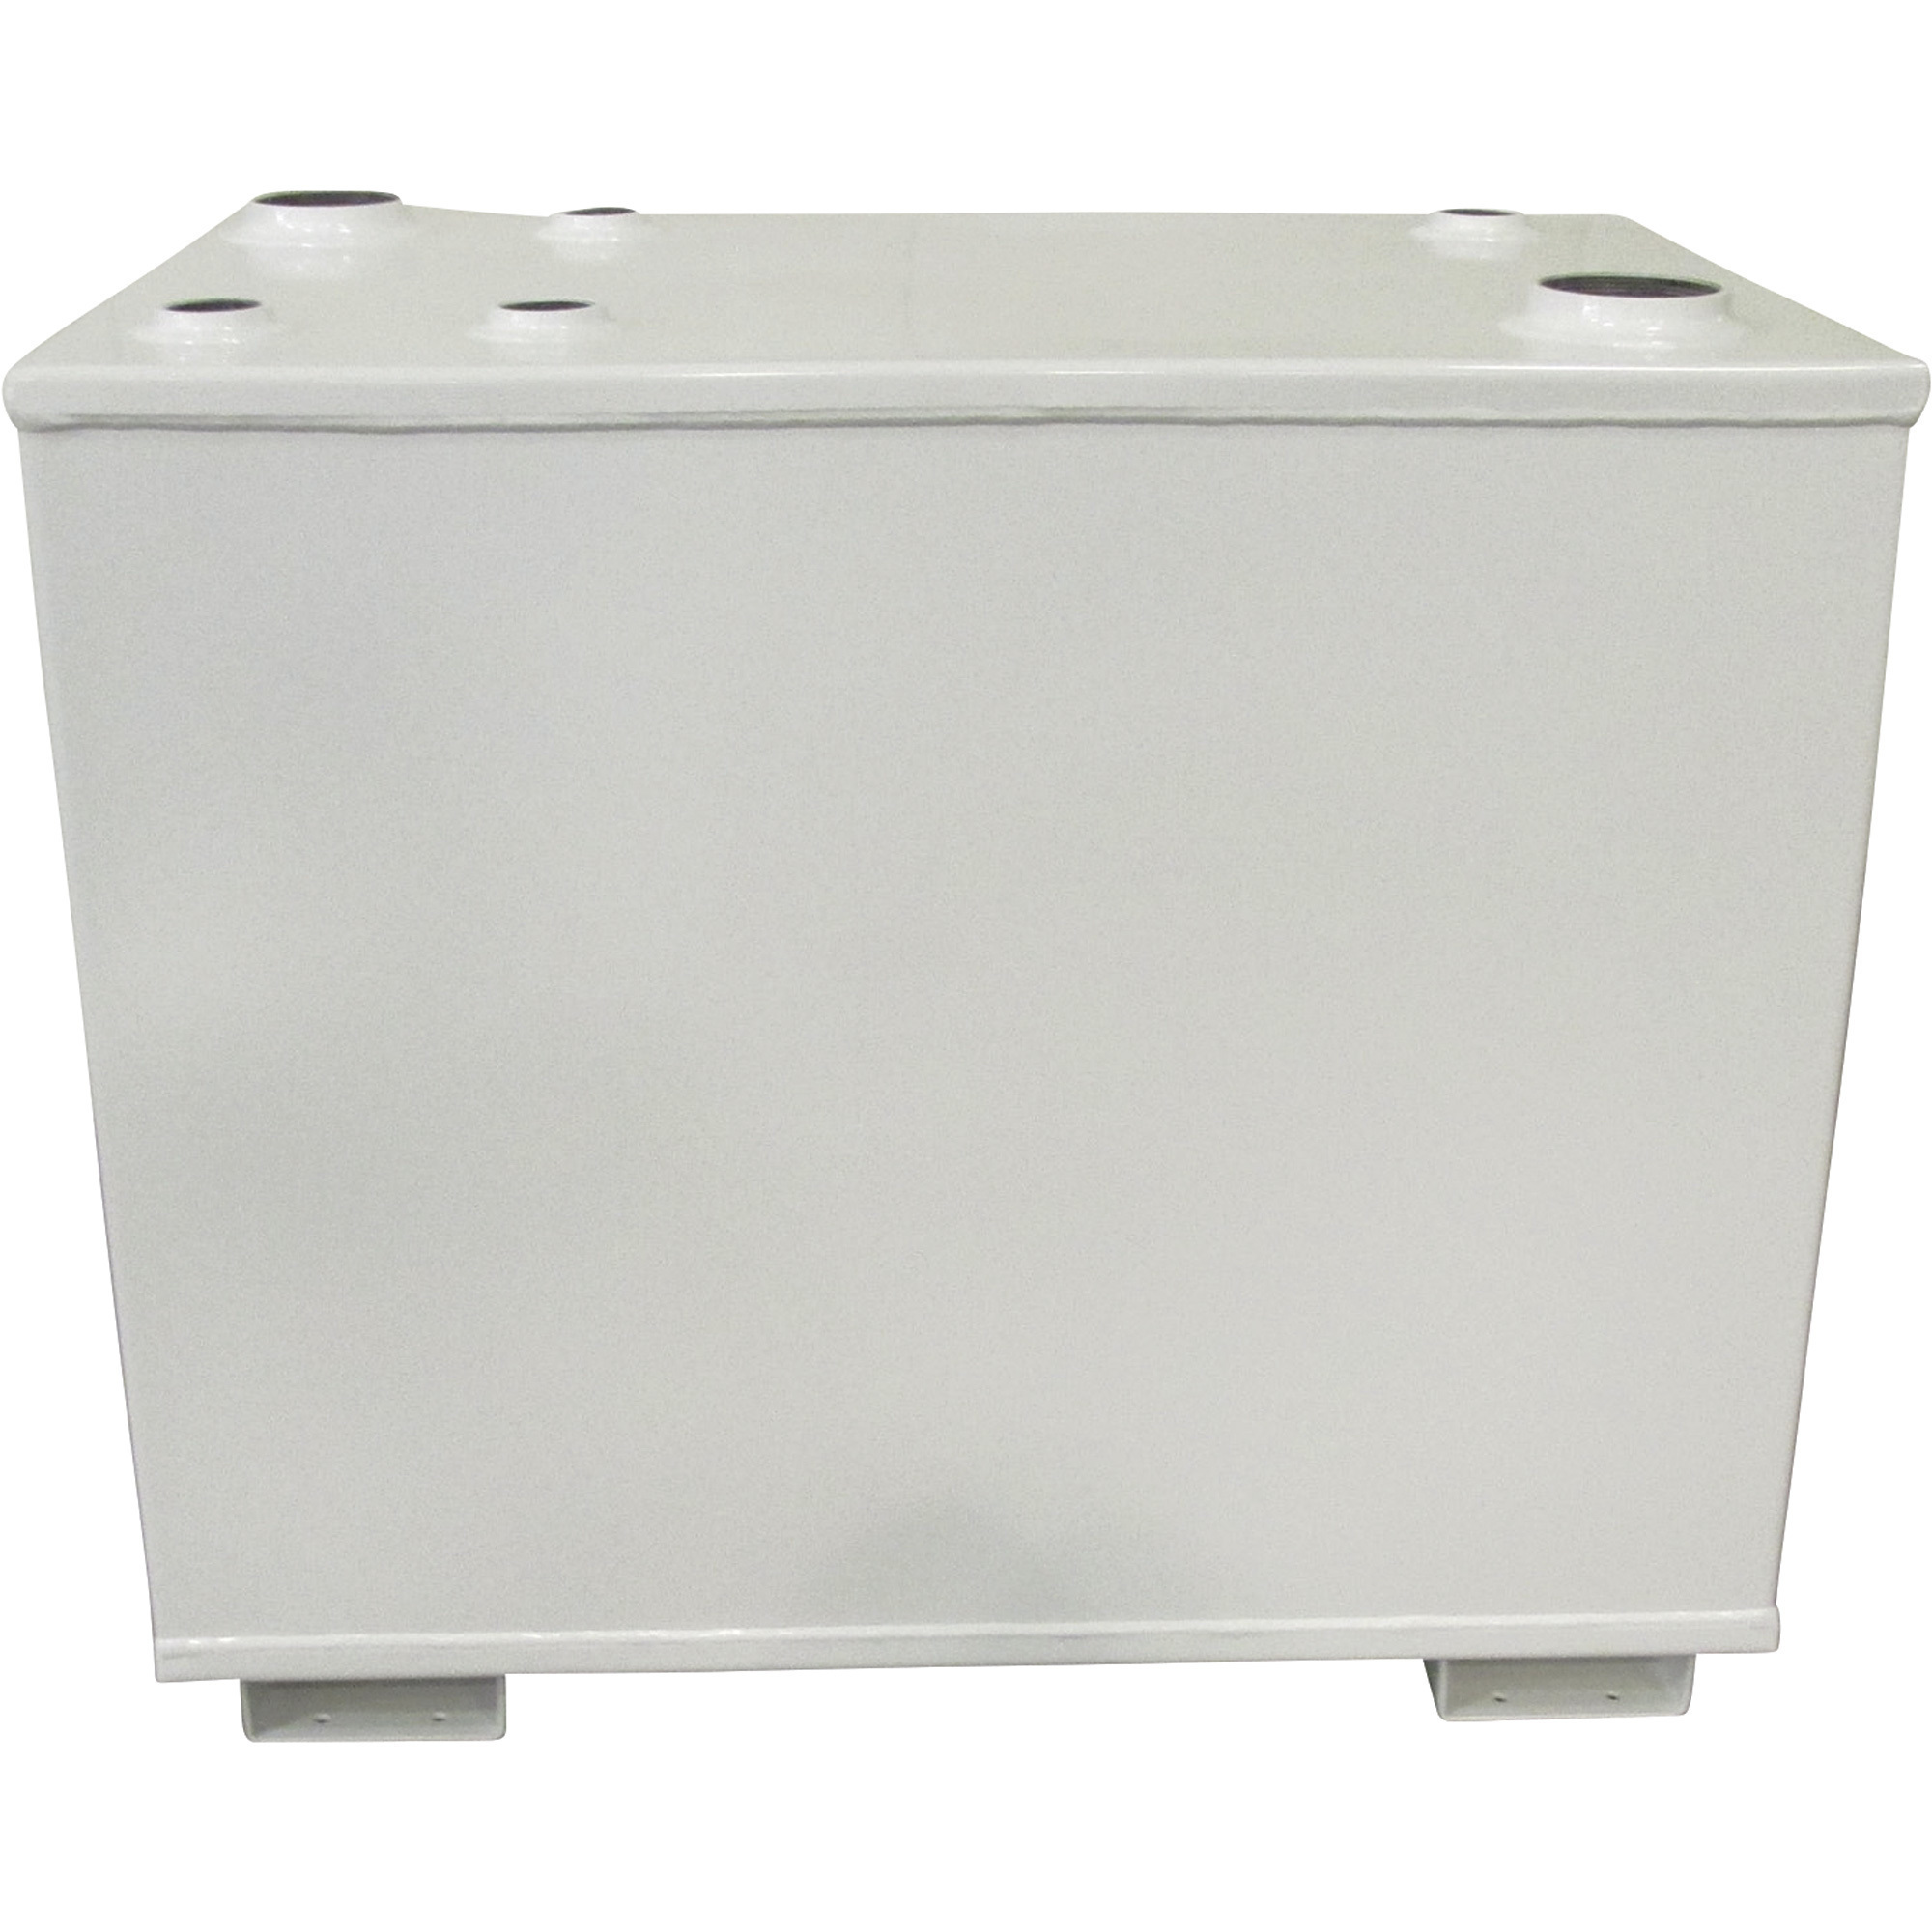 Double-Wall Storage Fuel Tank — 125-Gallon, Model - Midwest Industrial Tanks RTD-CC-125-10-12